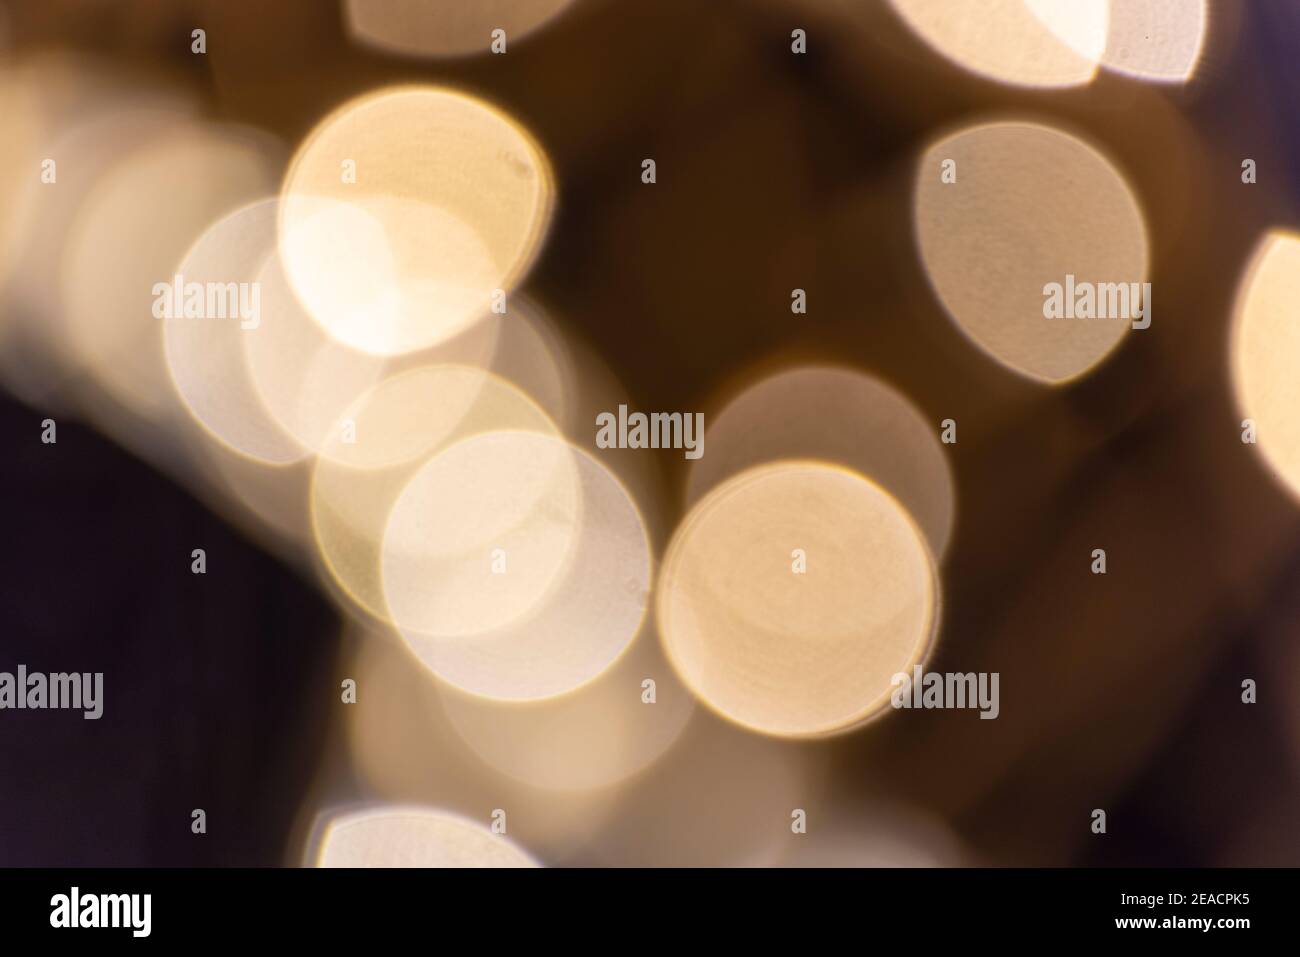 Abstract background with yellow and white lights. Stock Photo